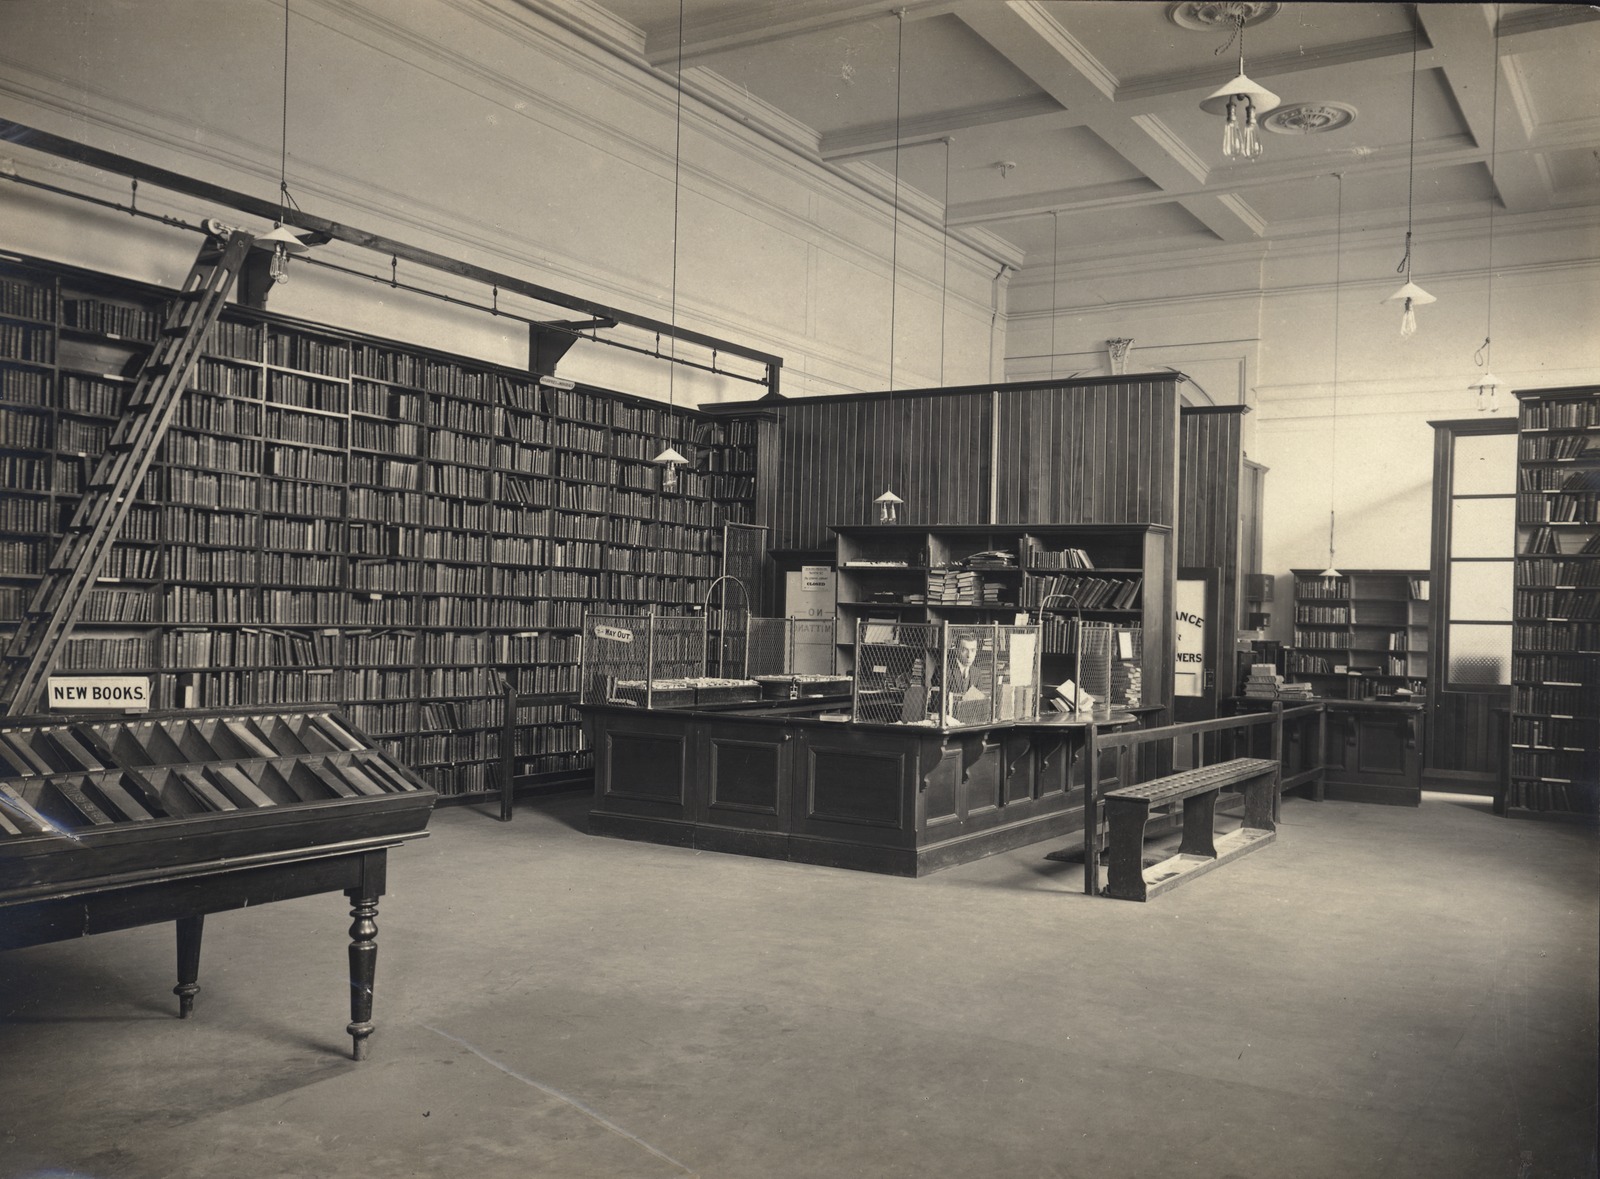 interior of the lending library at the state library, a wall of book shelves with a ladder on rails to access upper levels, a desk with a man behind it.